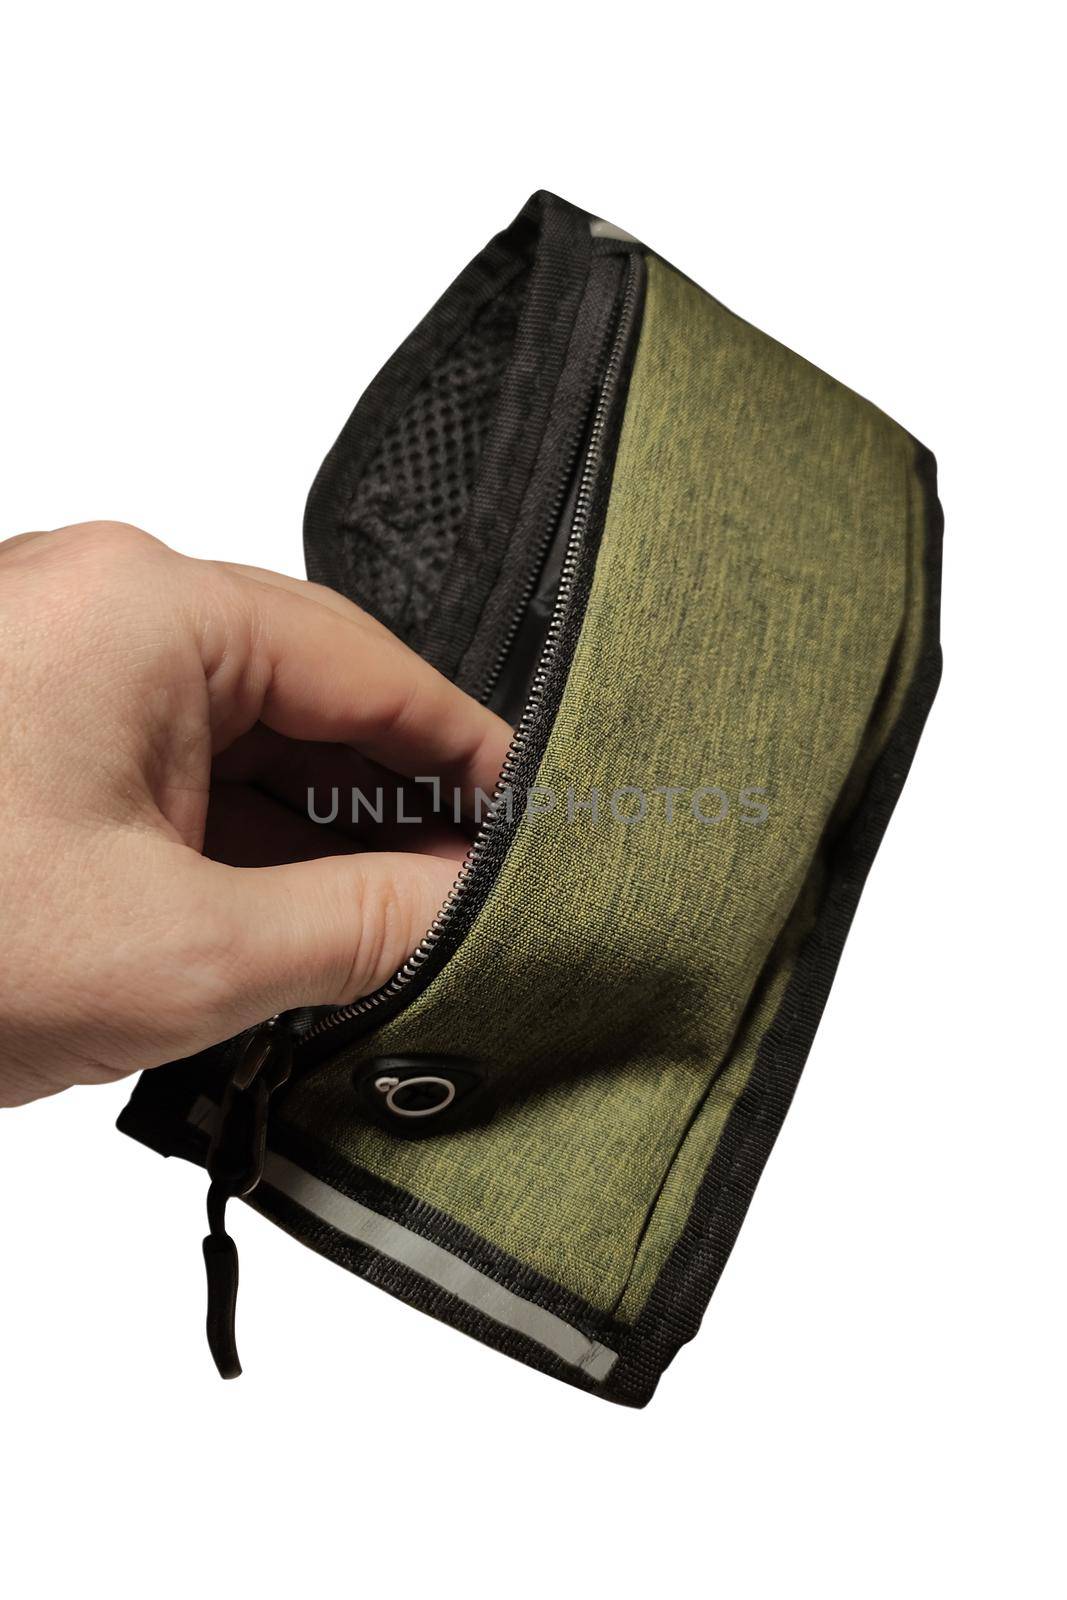 Man's hand opens an empty small sports waist bag isolated on white background